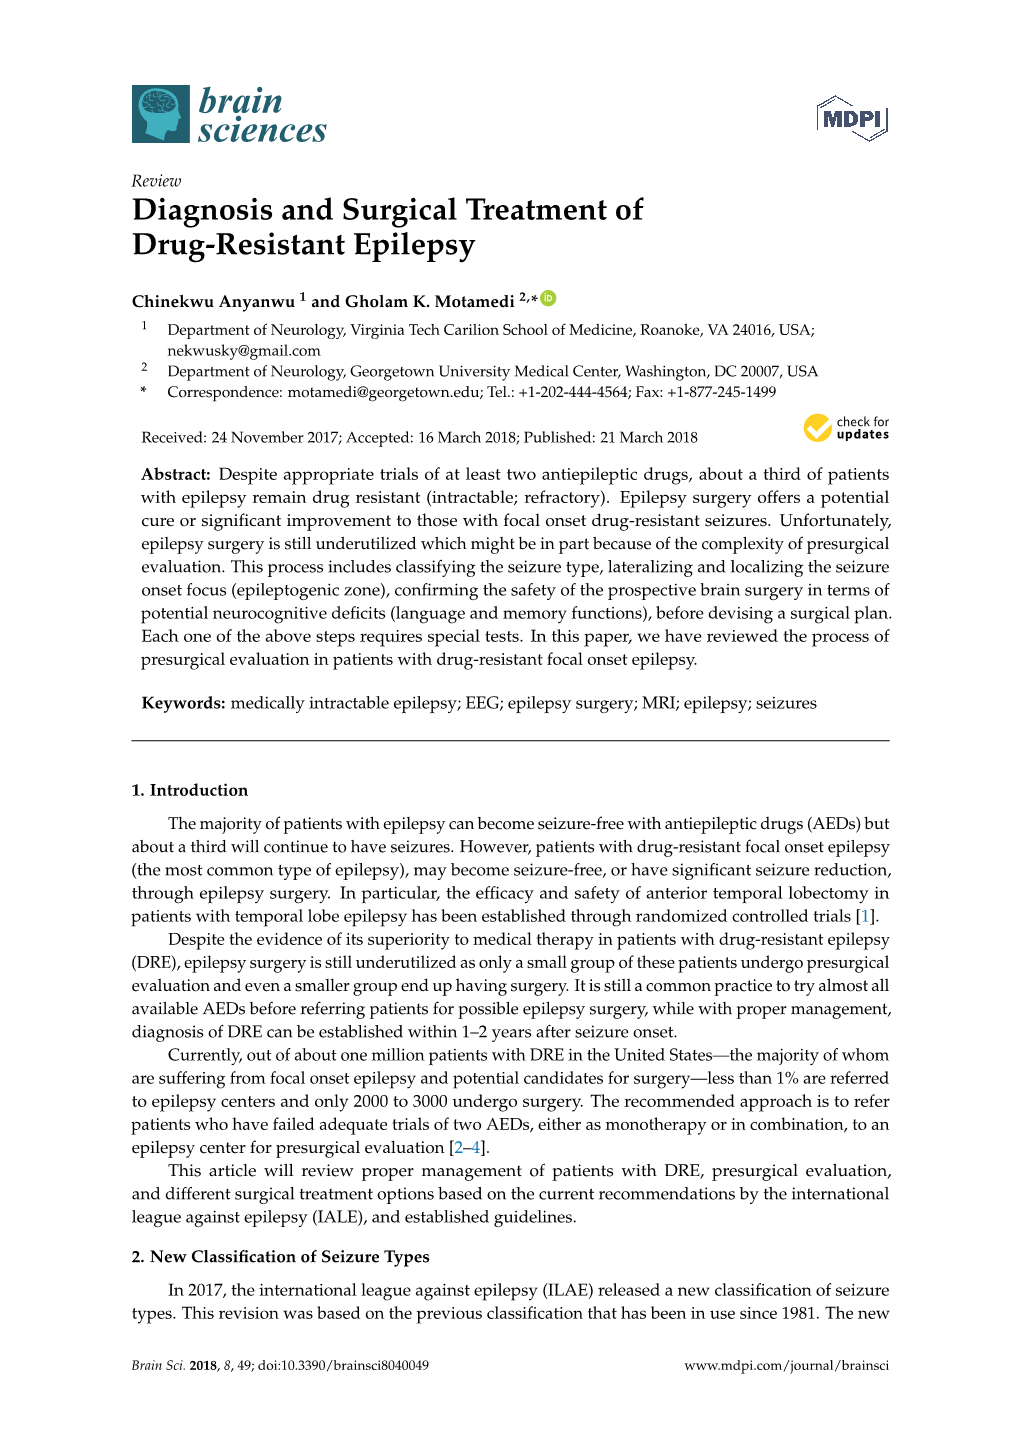 Diagnosis and Surgical Treatment of Drug-Resistant Epilepsy